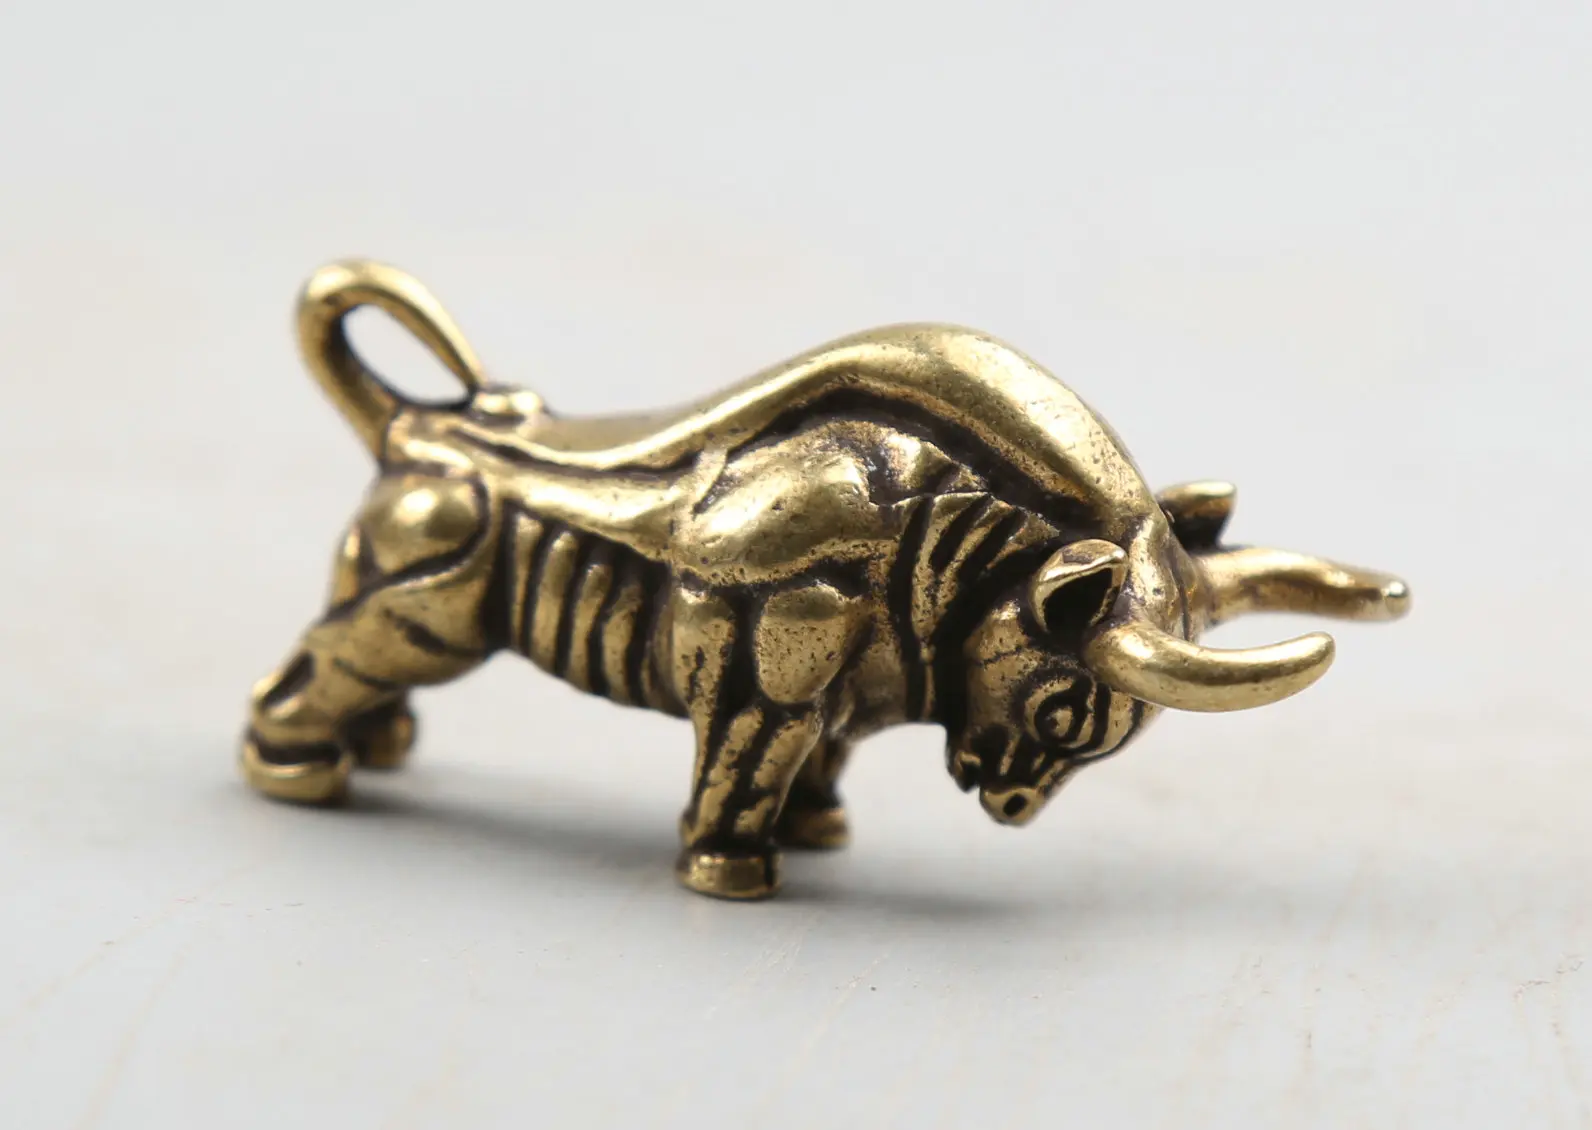 

54MM/2.1" Collect Curio Rare Chinese Fengshui Small Bronze Exquisite Animal 12 Zodiac Year Bull Oxen Ox Toro Cattle Statuary 35g